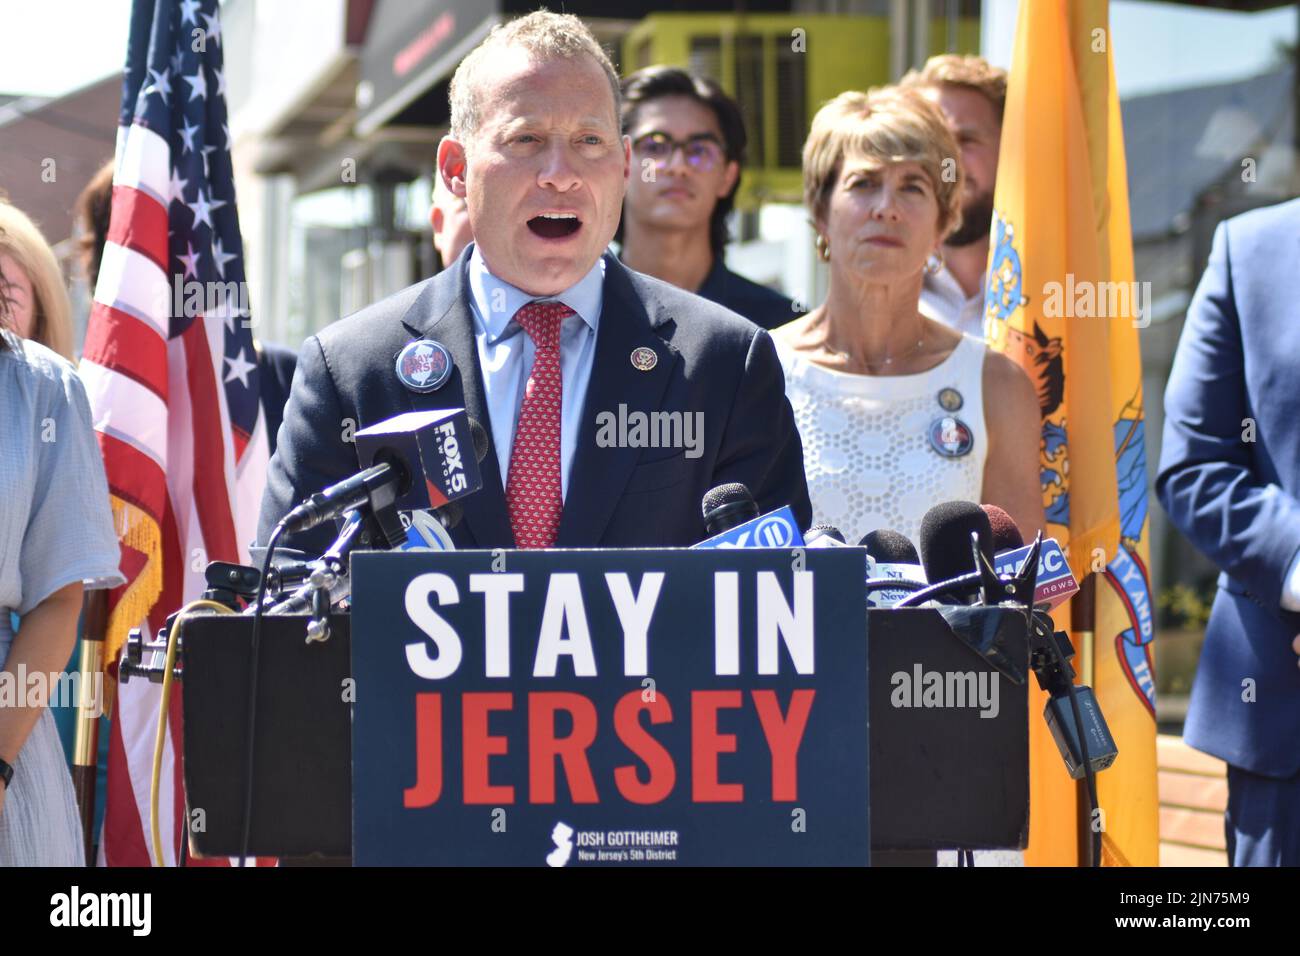 Fair Lawn, NJ, USA. 9th Aug, 2022. (NEW) New Jersey Leaders Announce New State Legislation to Combat NYC Congestion Tax Whacking Jersey Drivers. August 09, 2022, Fair Lawn, New Jersey, USA: Congressman Josh Gottheimer (NJ-5) and New Jersey Leaders announce New State Legislation to combat NYC Congestion Tax Whacking Jersey Drivers. This is to help incentivize the development of businesses in Jersey that reduce commute time for full-time employees, helping Jersey residents Ã¢â‚¬Å“Stay in JerseyÃ¢â‚¬Â and avoid New YorkÃ¢â‚¬â„¢s proposed Congestion Tax. (Credit Image: © Kyle Mazza/TheNEWS2 via Stock Photo